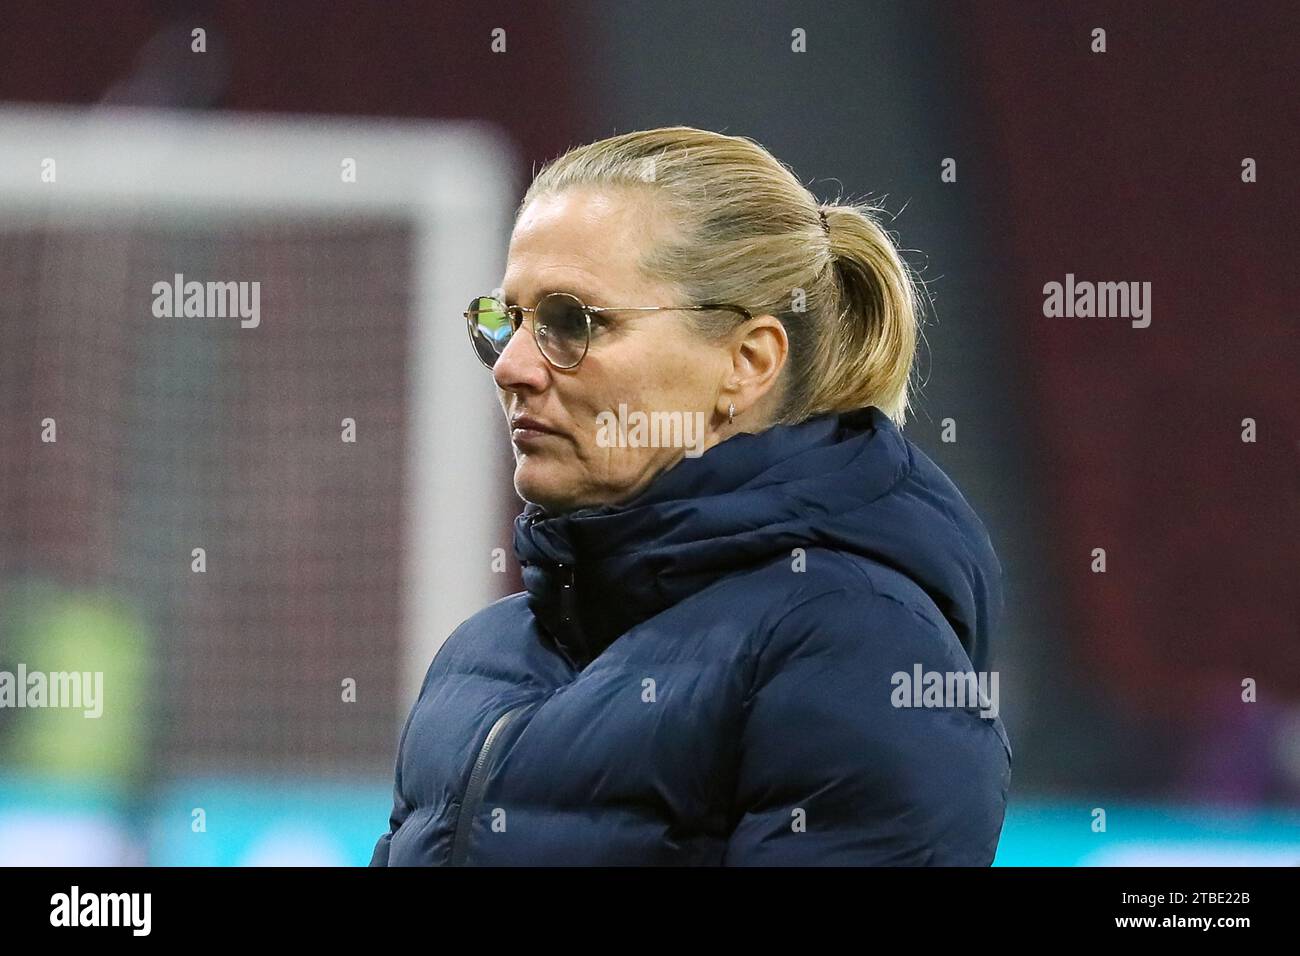 SARINA WIEGMAN, head coach of the English Women's National football team. Image taken while she was watching the players training and warming up, pre Stock Photo